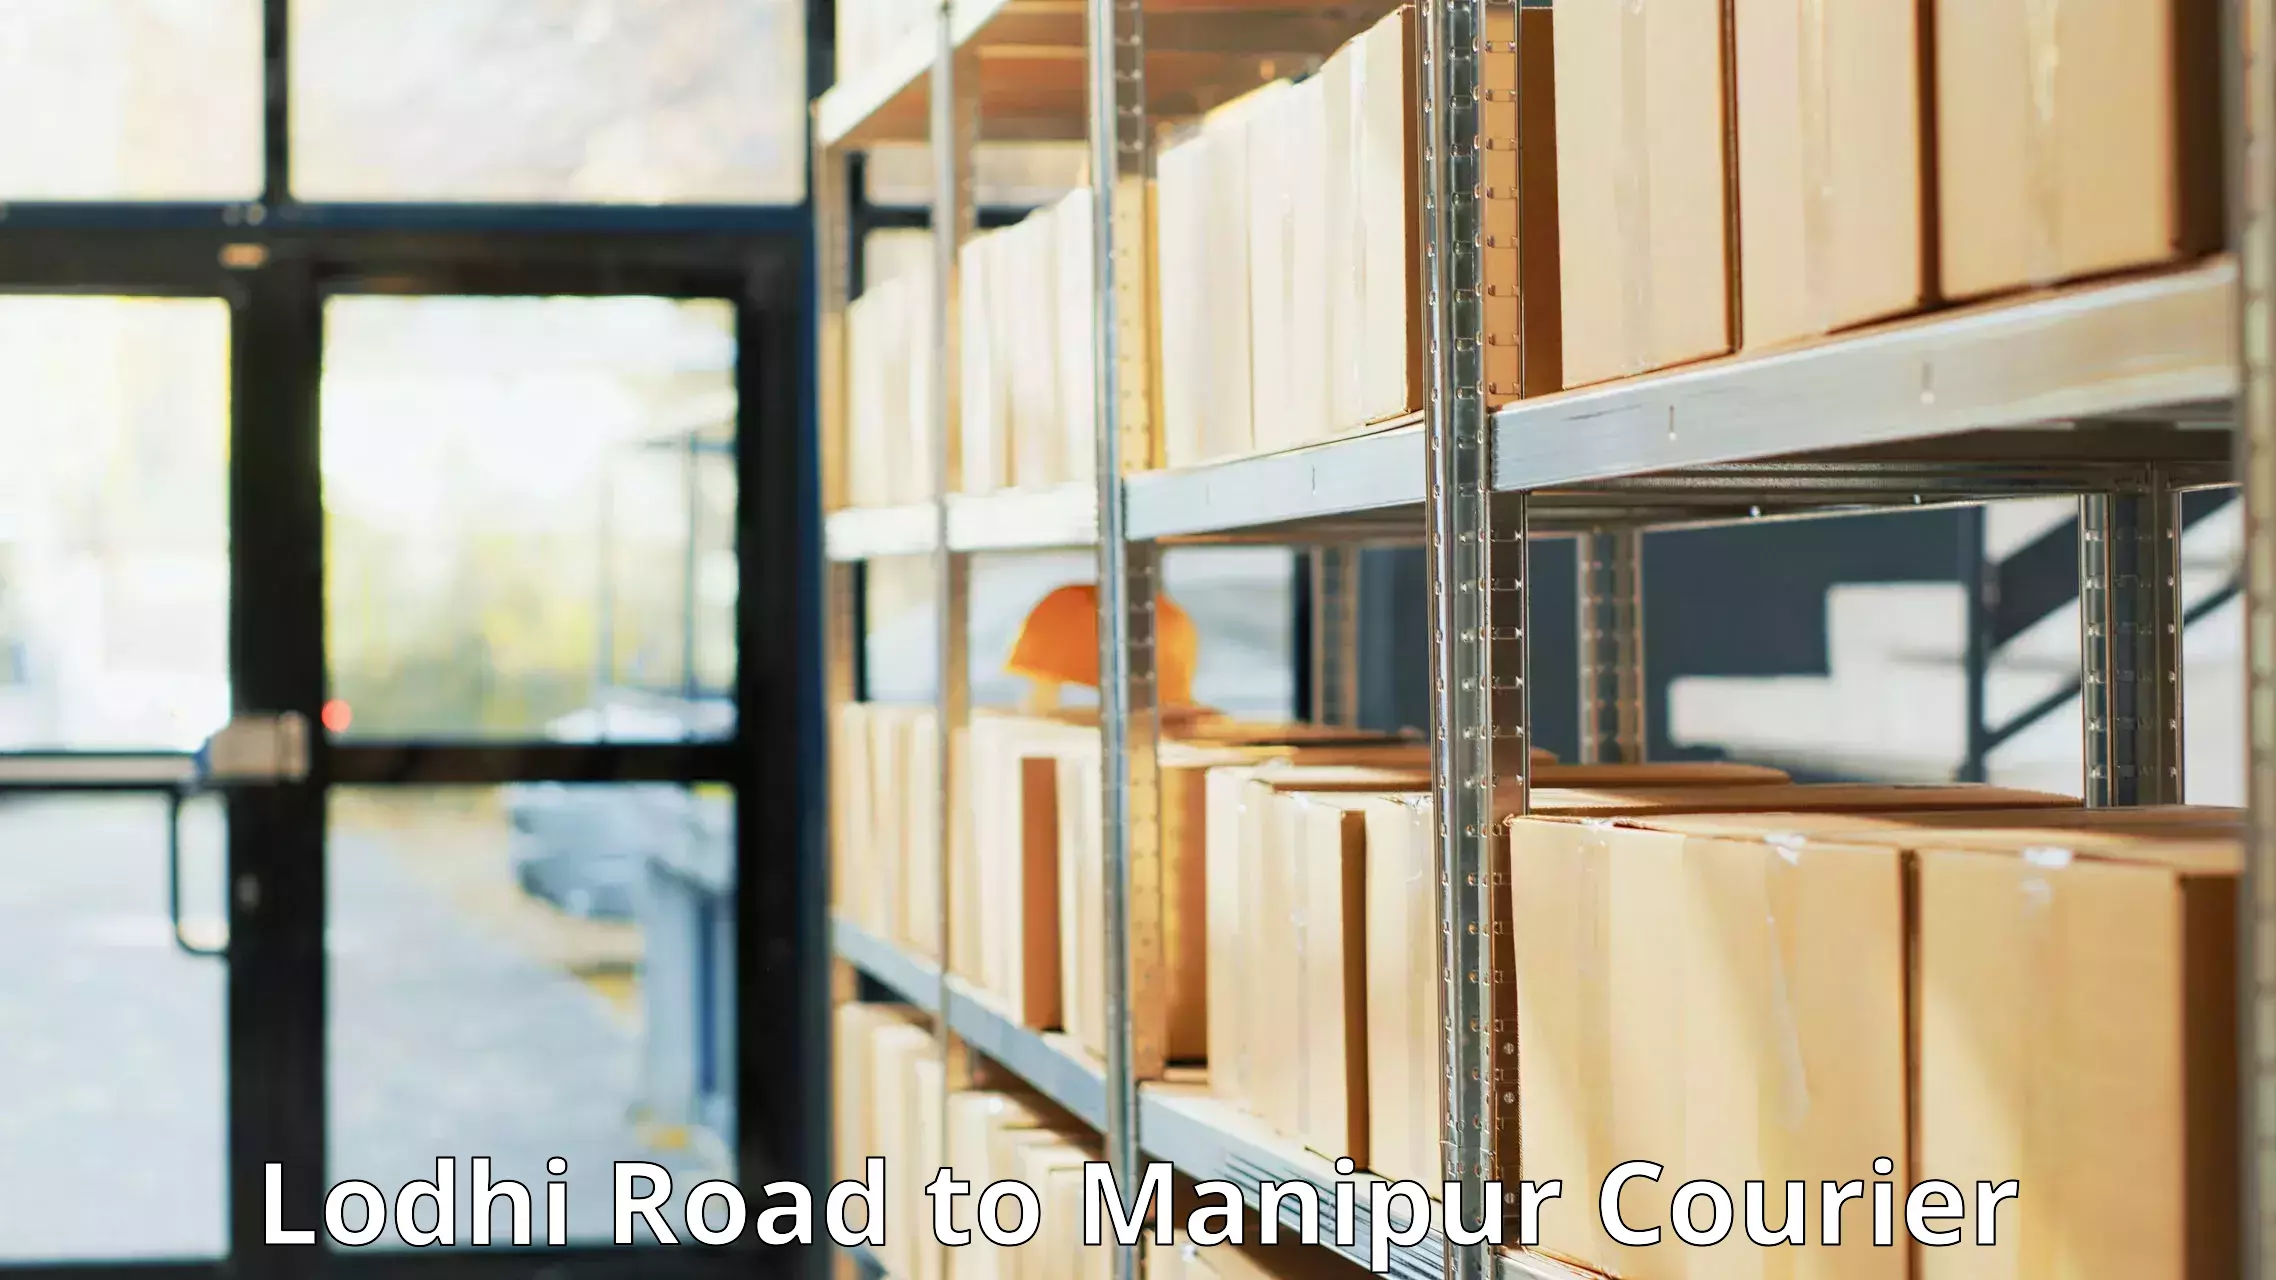 High-capacity parcel service Lodhi Road to Manipur